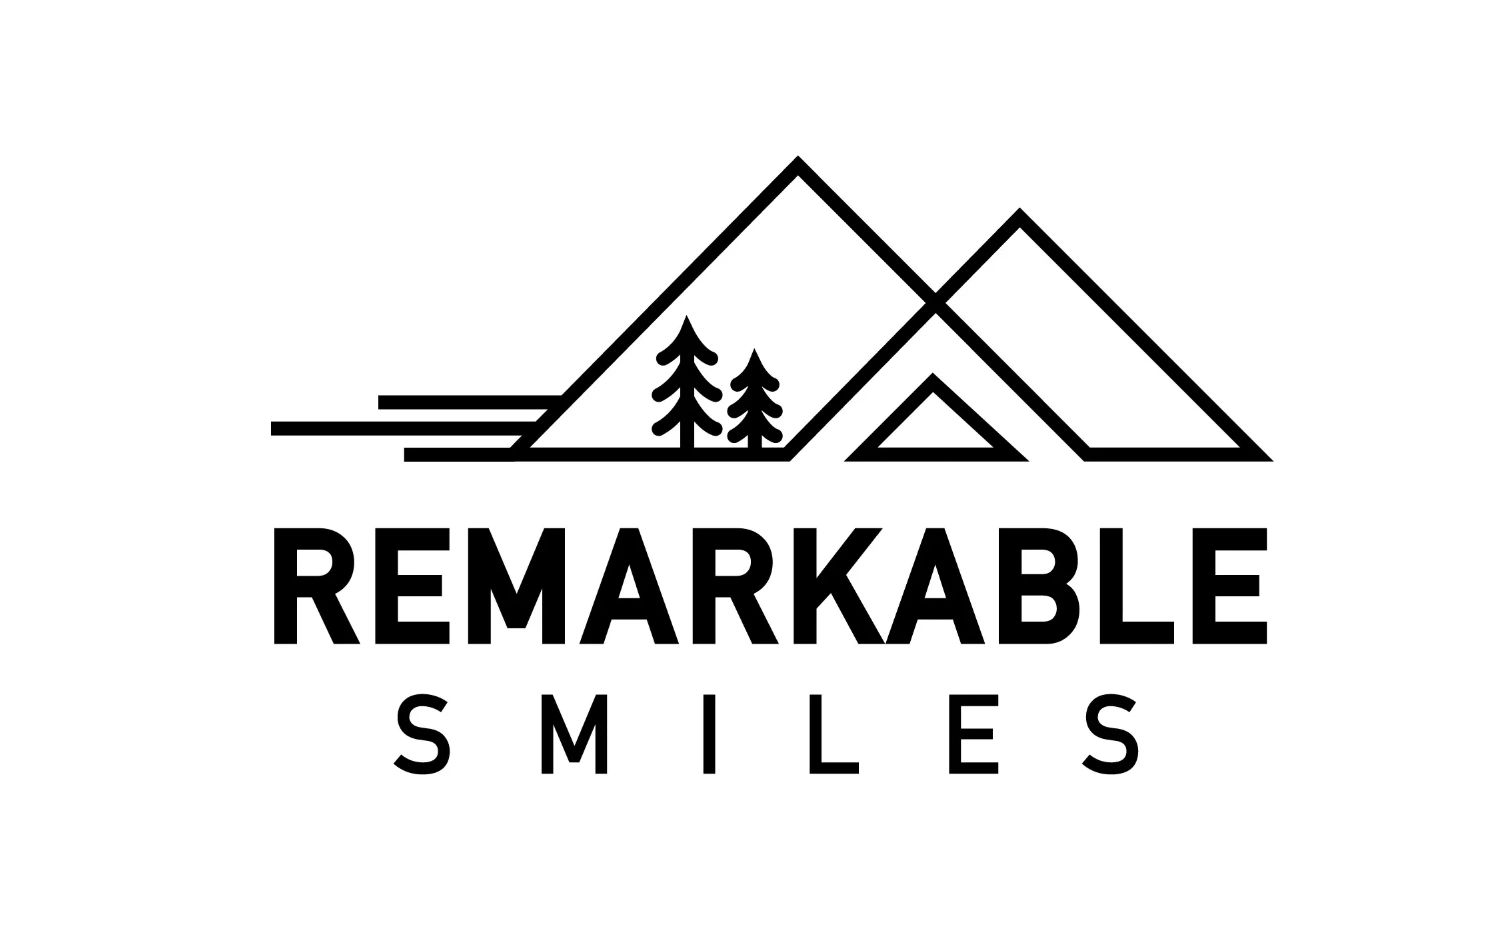 Remarkable Smiles